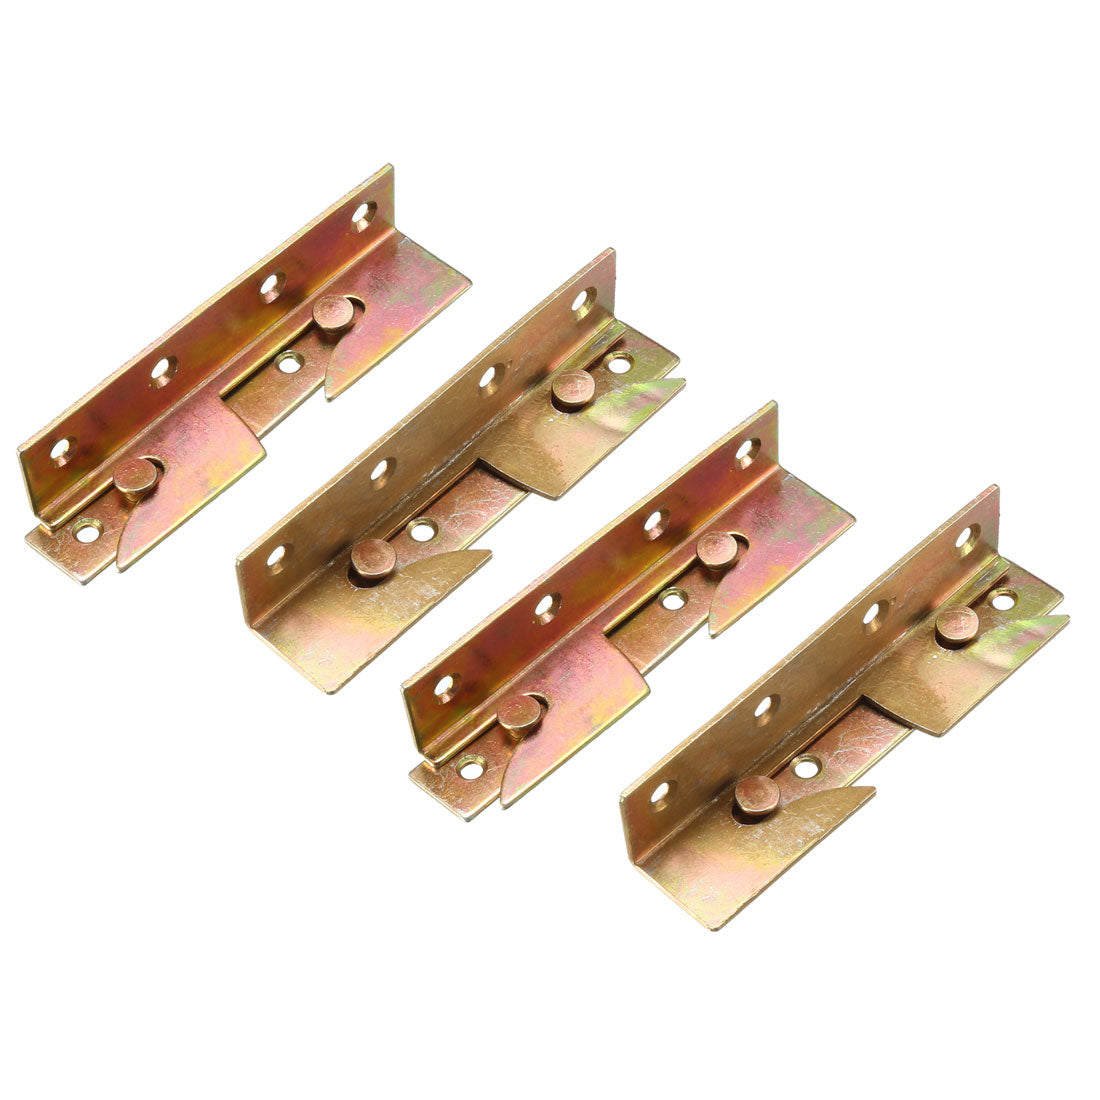 uxcell Uxcell 4.5-inch Screw Fixed Bed Hinge Rail Brackets Connecting Fittings 4 Sets